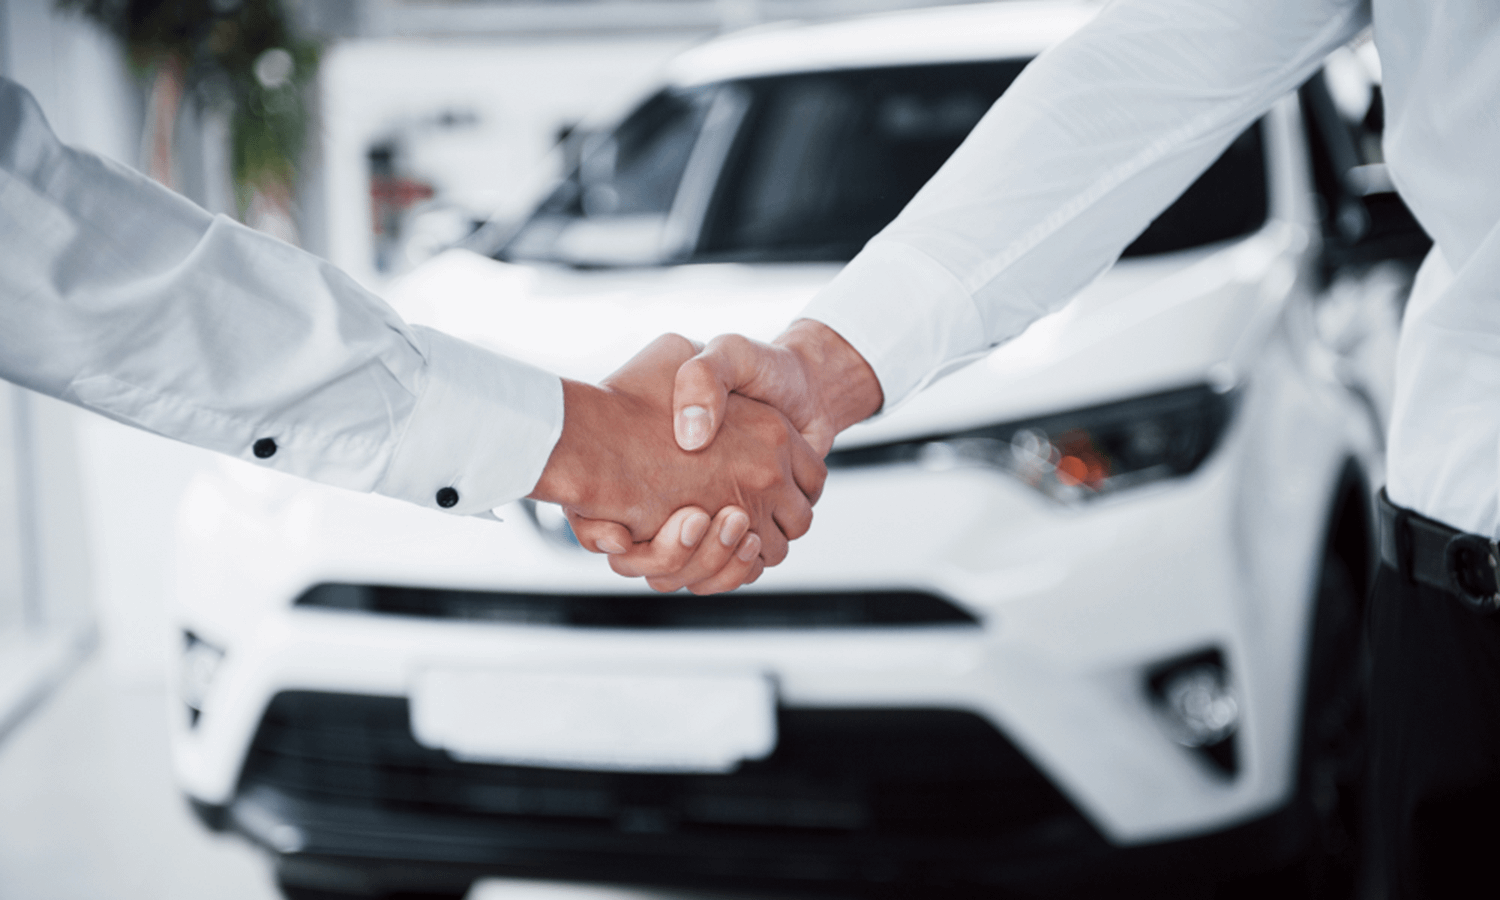 Shaking hands after selling a white car